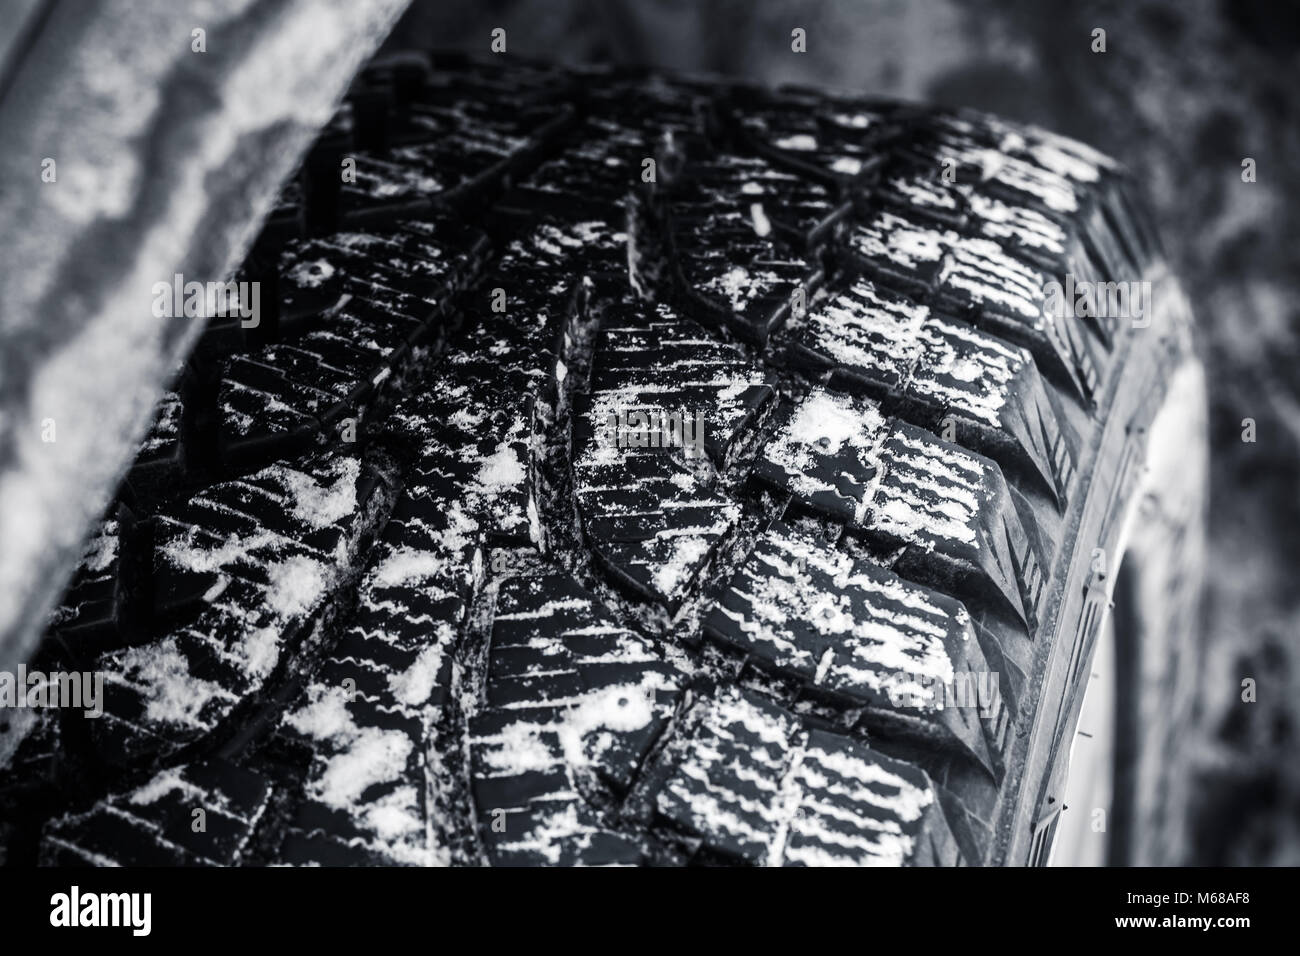 Snow tire with metal studs, which improve traction on icy surfaces, close-up photo of car wheel with selective focus Stock Photo